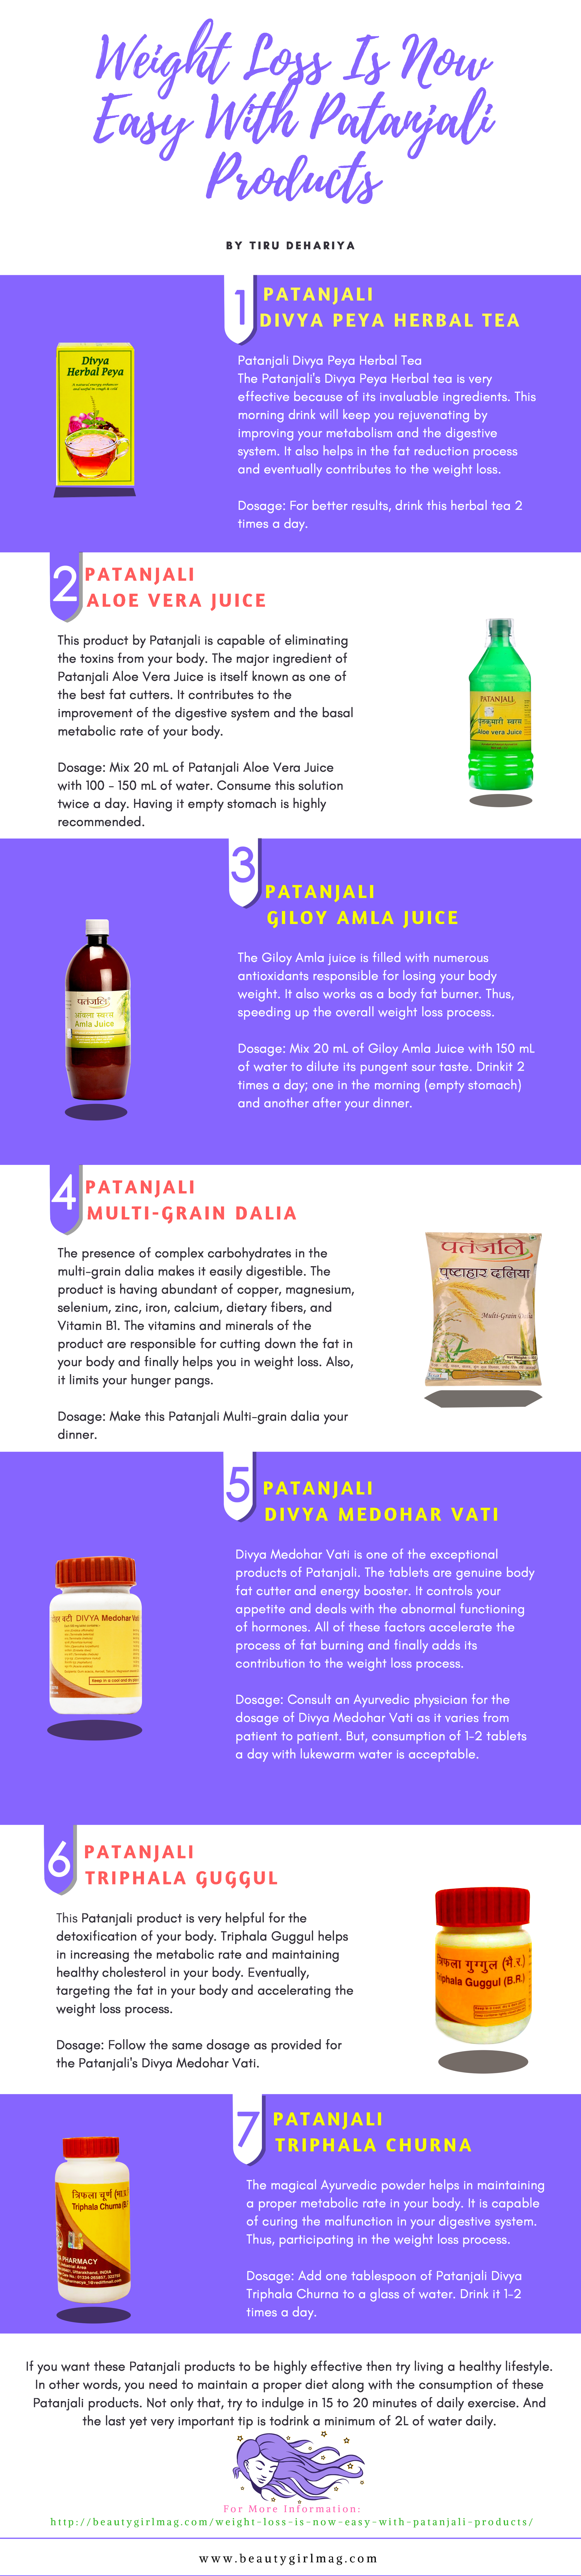 Weight loss is now easy with patanjali products